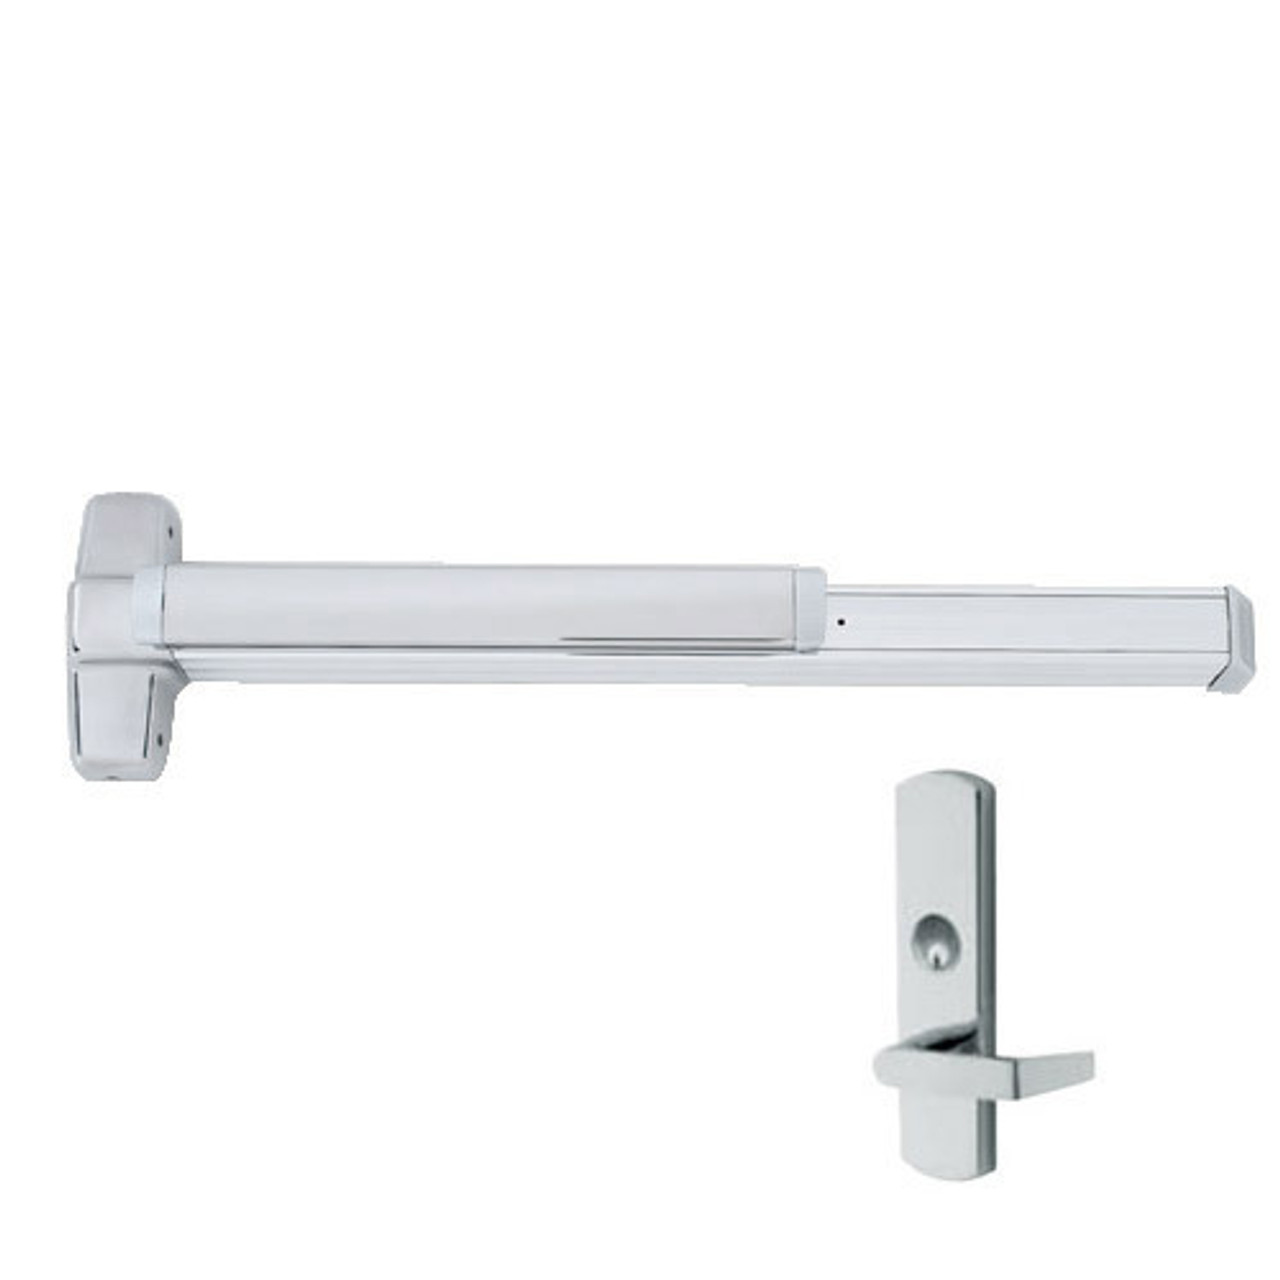 CD9847WDC-L-US28-4-RHR Von Duprin Exit Device with Cylinder Dogging in Anodized Aluminum